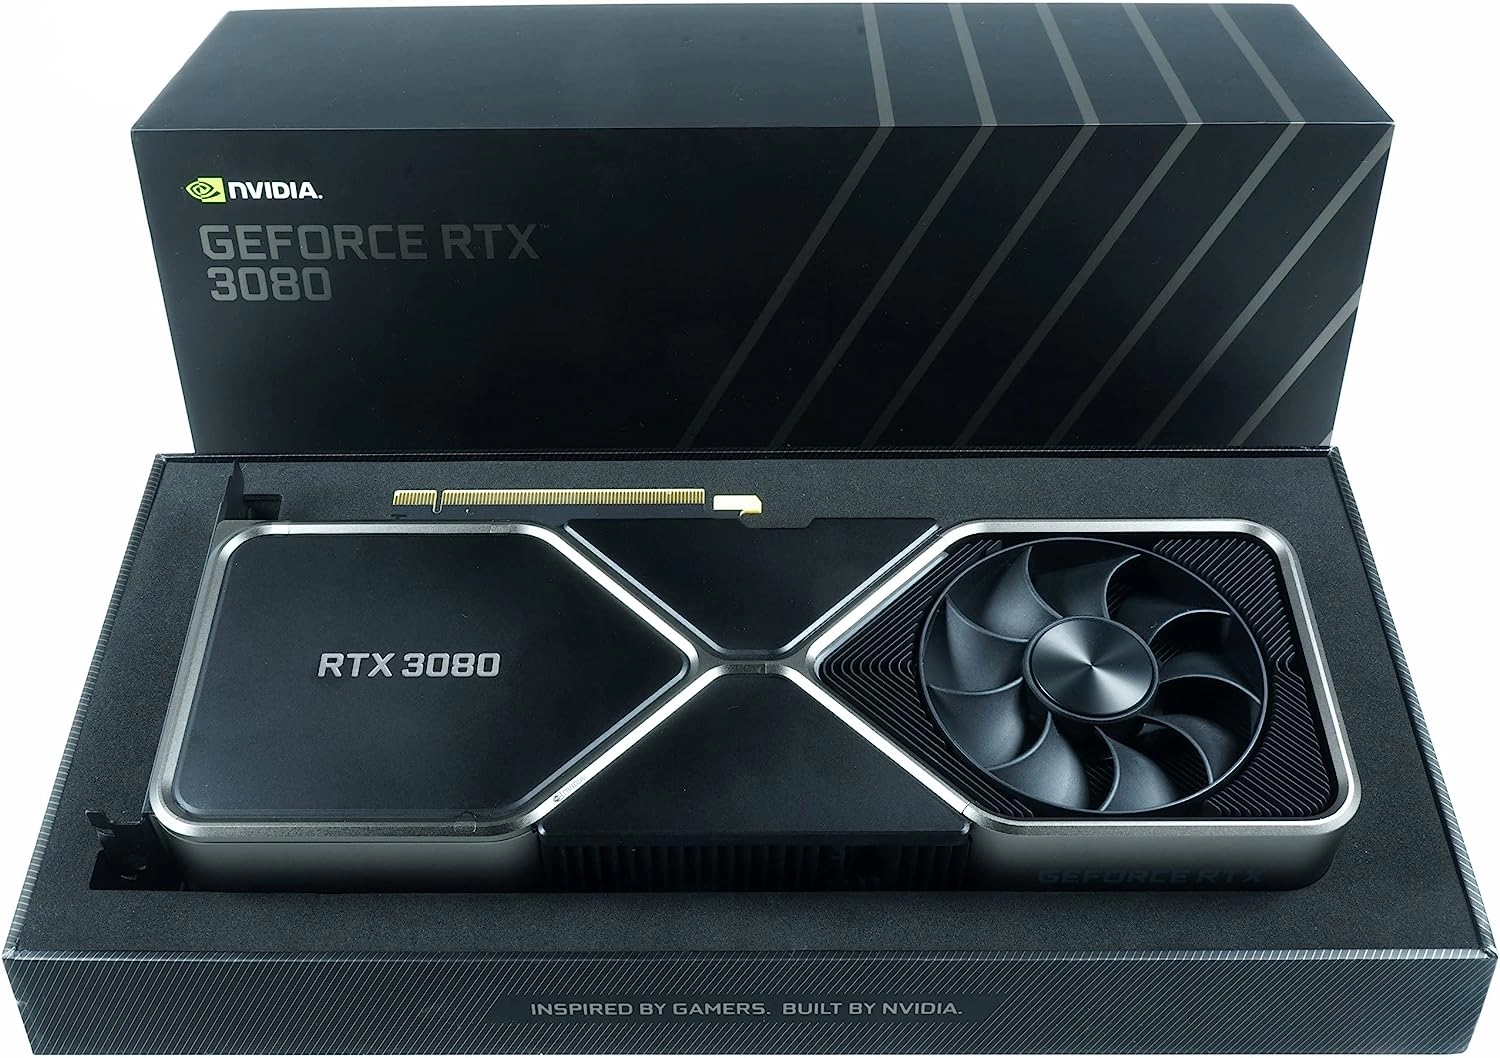 NVIDIA GeForce RTX 3080 Package